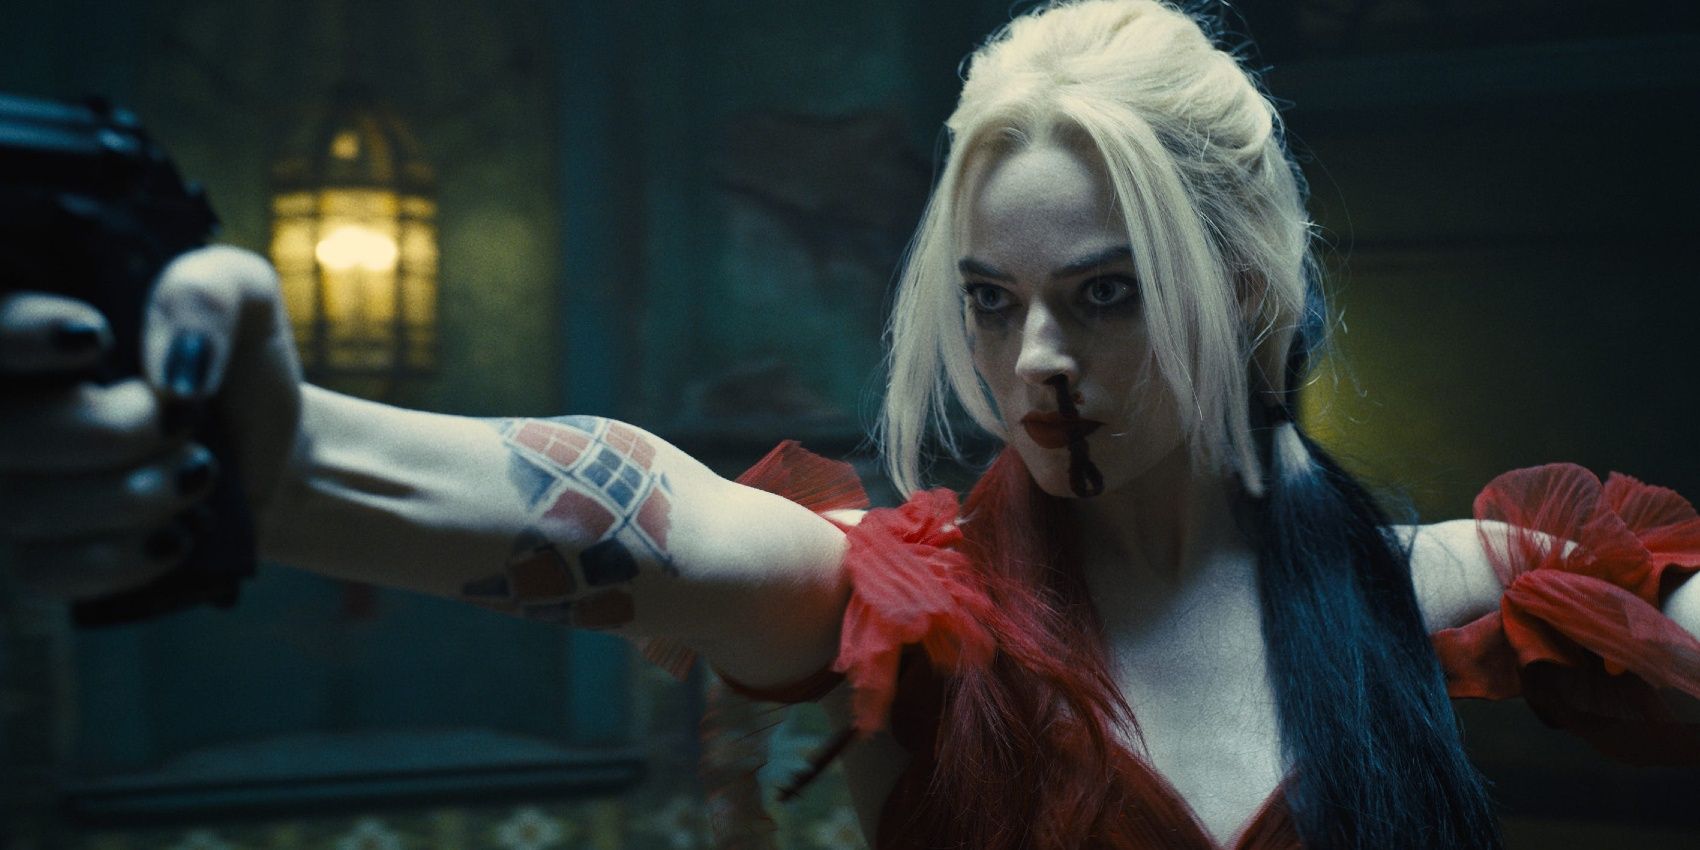 Harley Quinn points a gun in The Suicide Squad